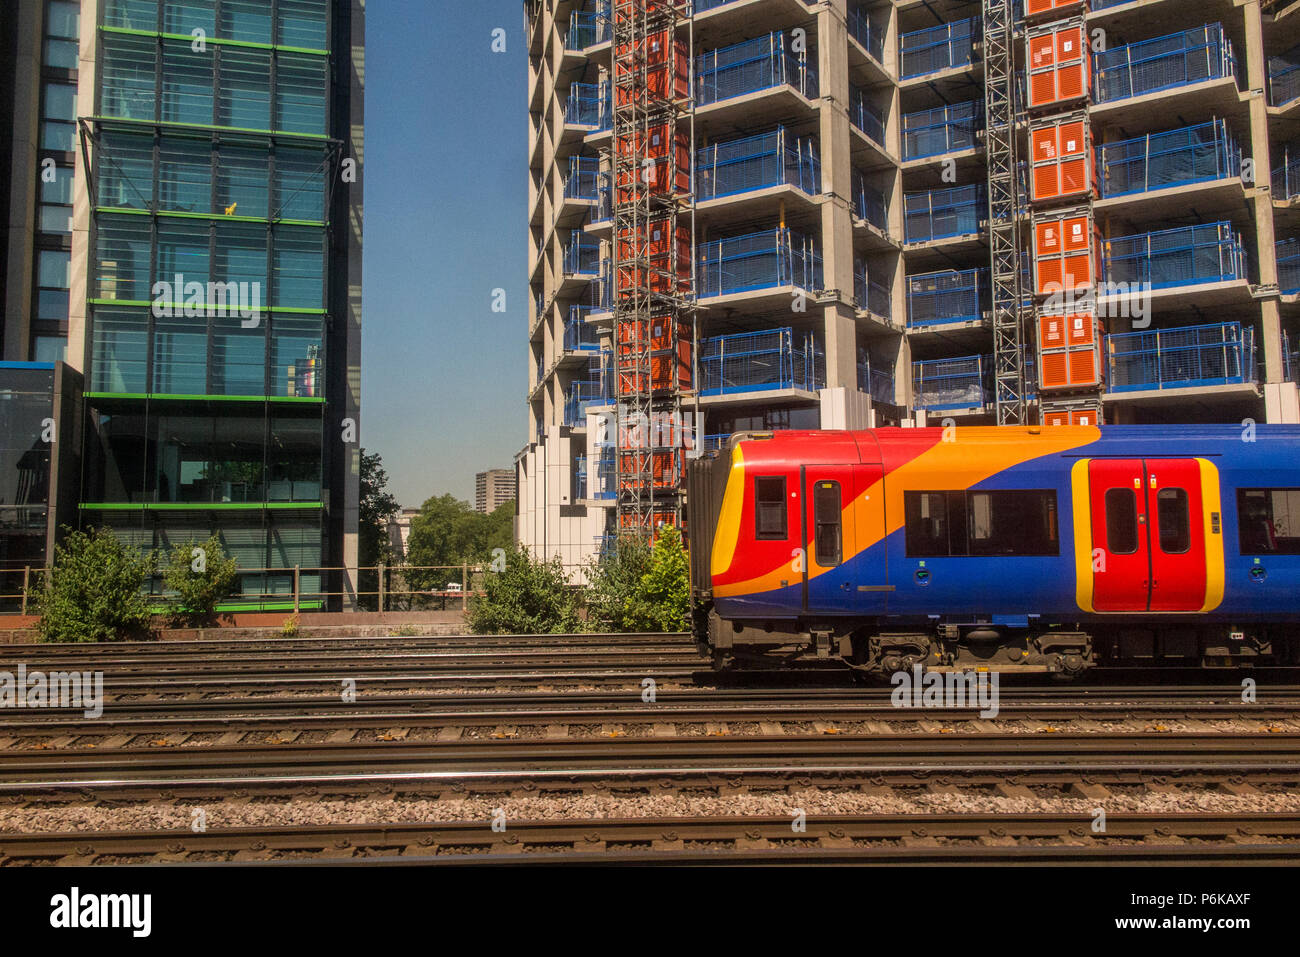 A South Western Railway train leaves London Waterloo station on its way to the suburbs of London Stock Photo